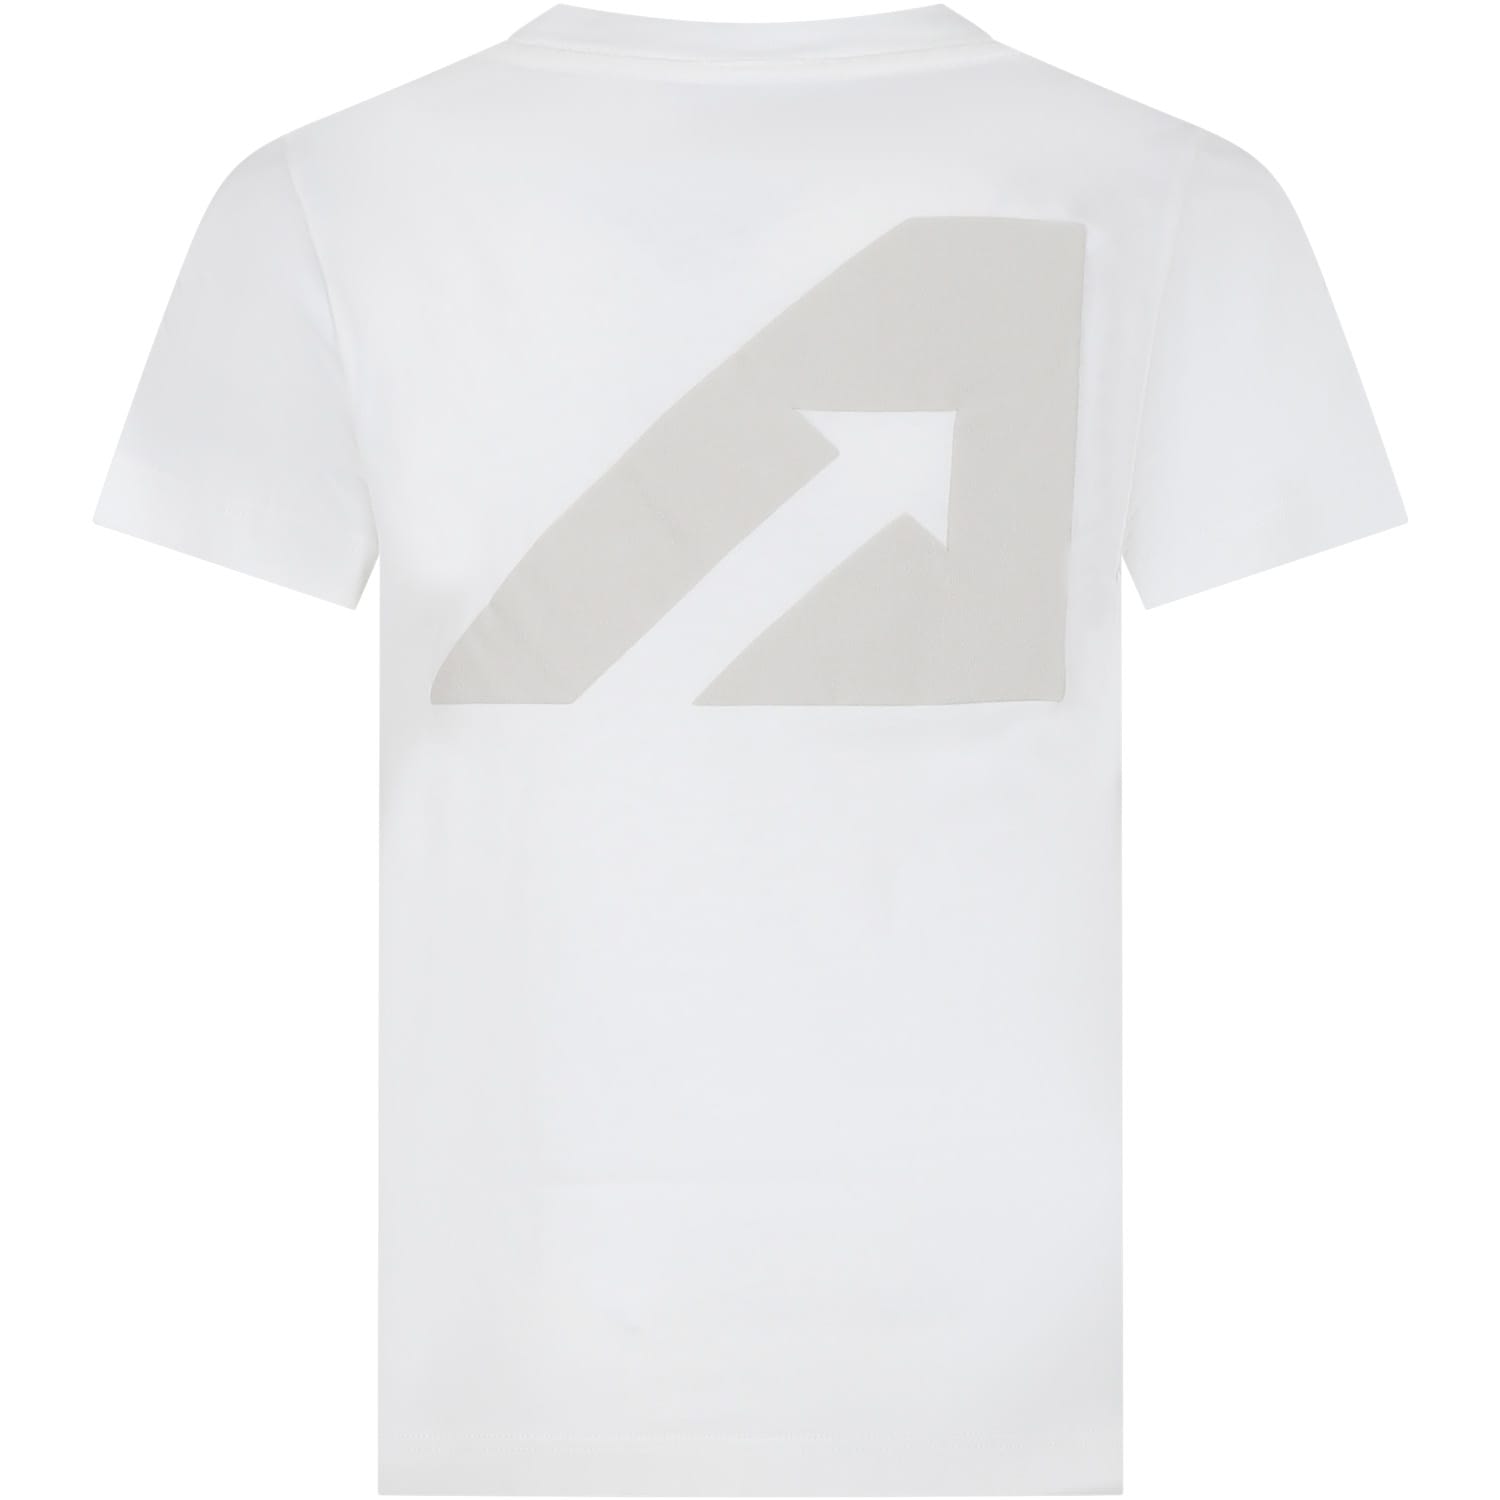 Shop Autry White T-shirt For Kids With Logo